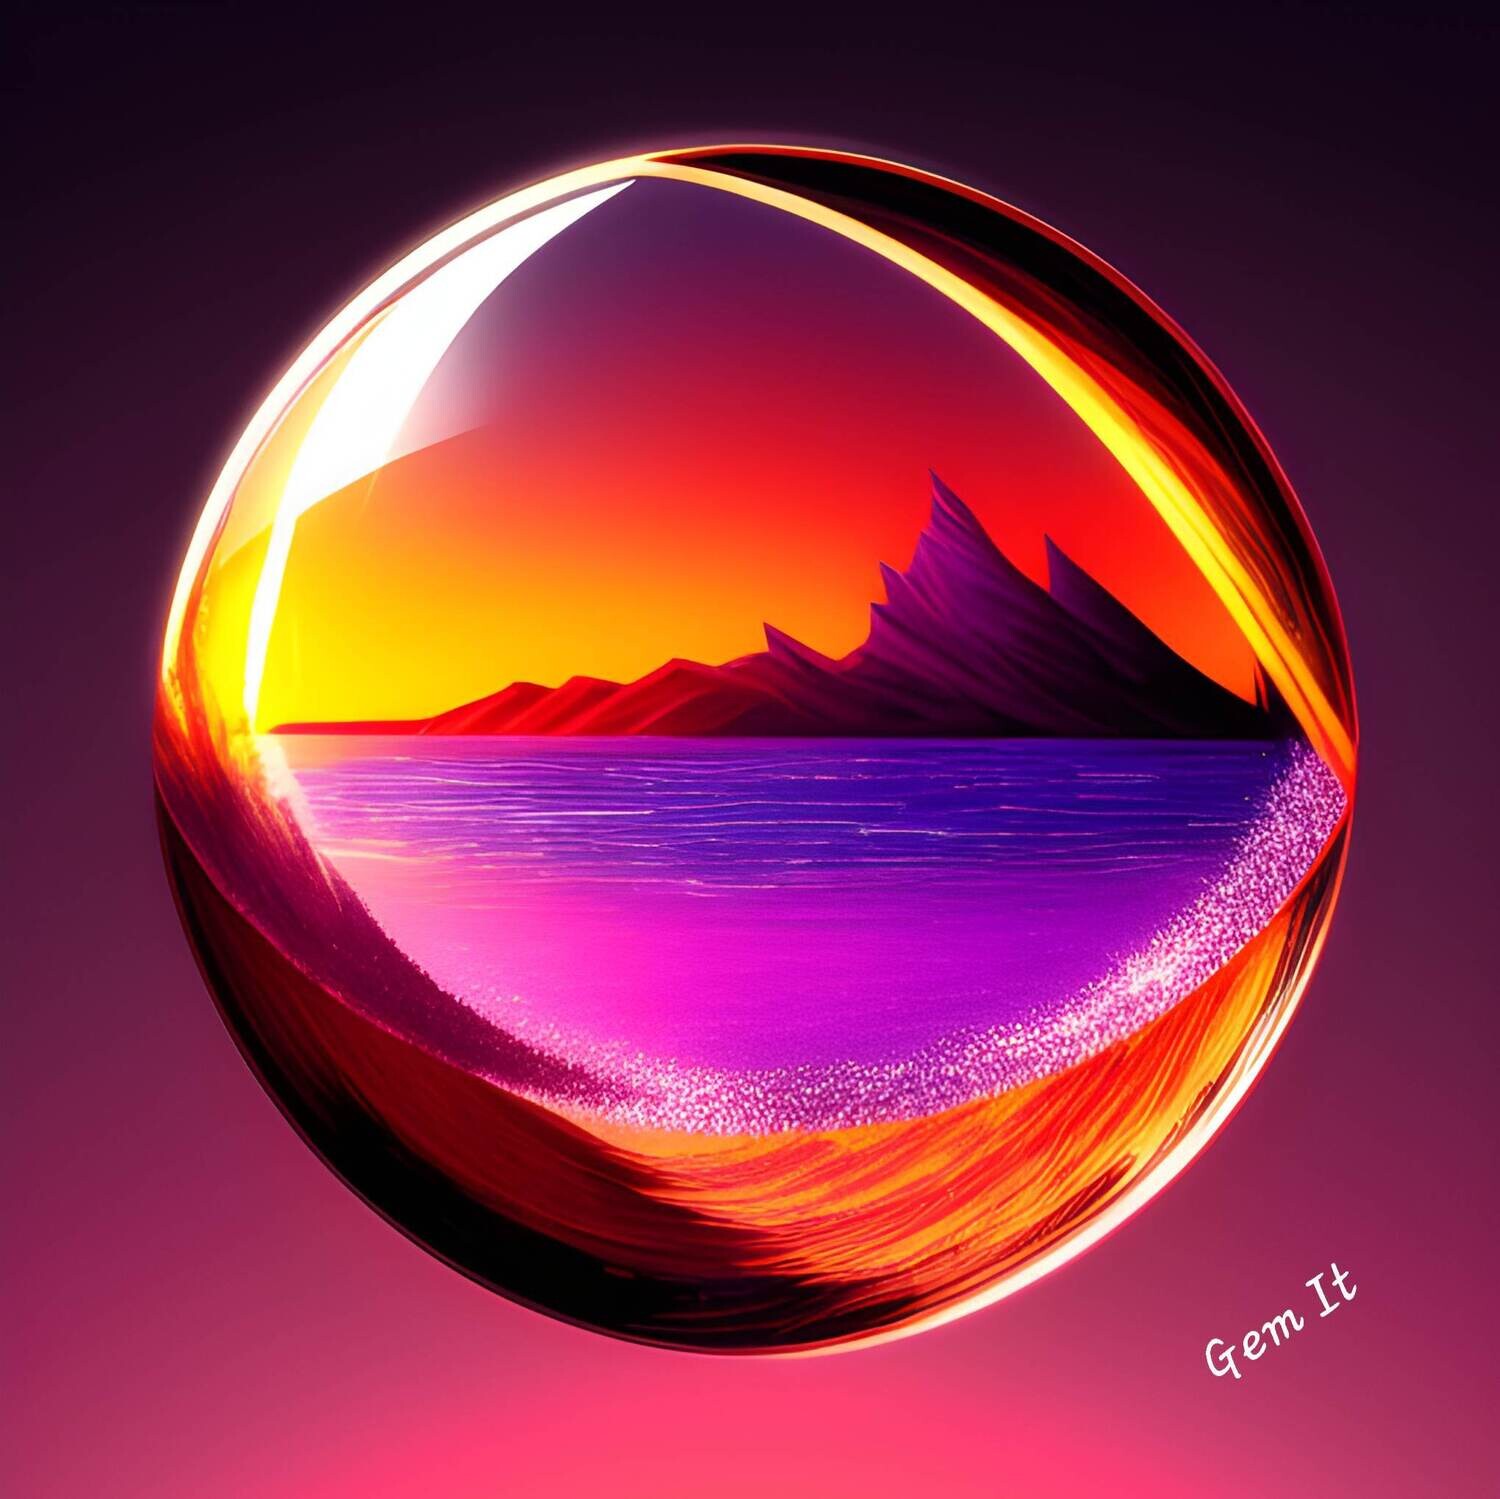 Glass Ball Sunset 624- Full Drill Diamond Painting - Specially ordered for you. Delivery is approximately 4 - 6 weeks.